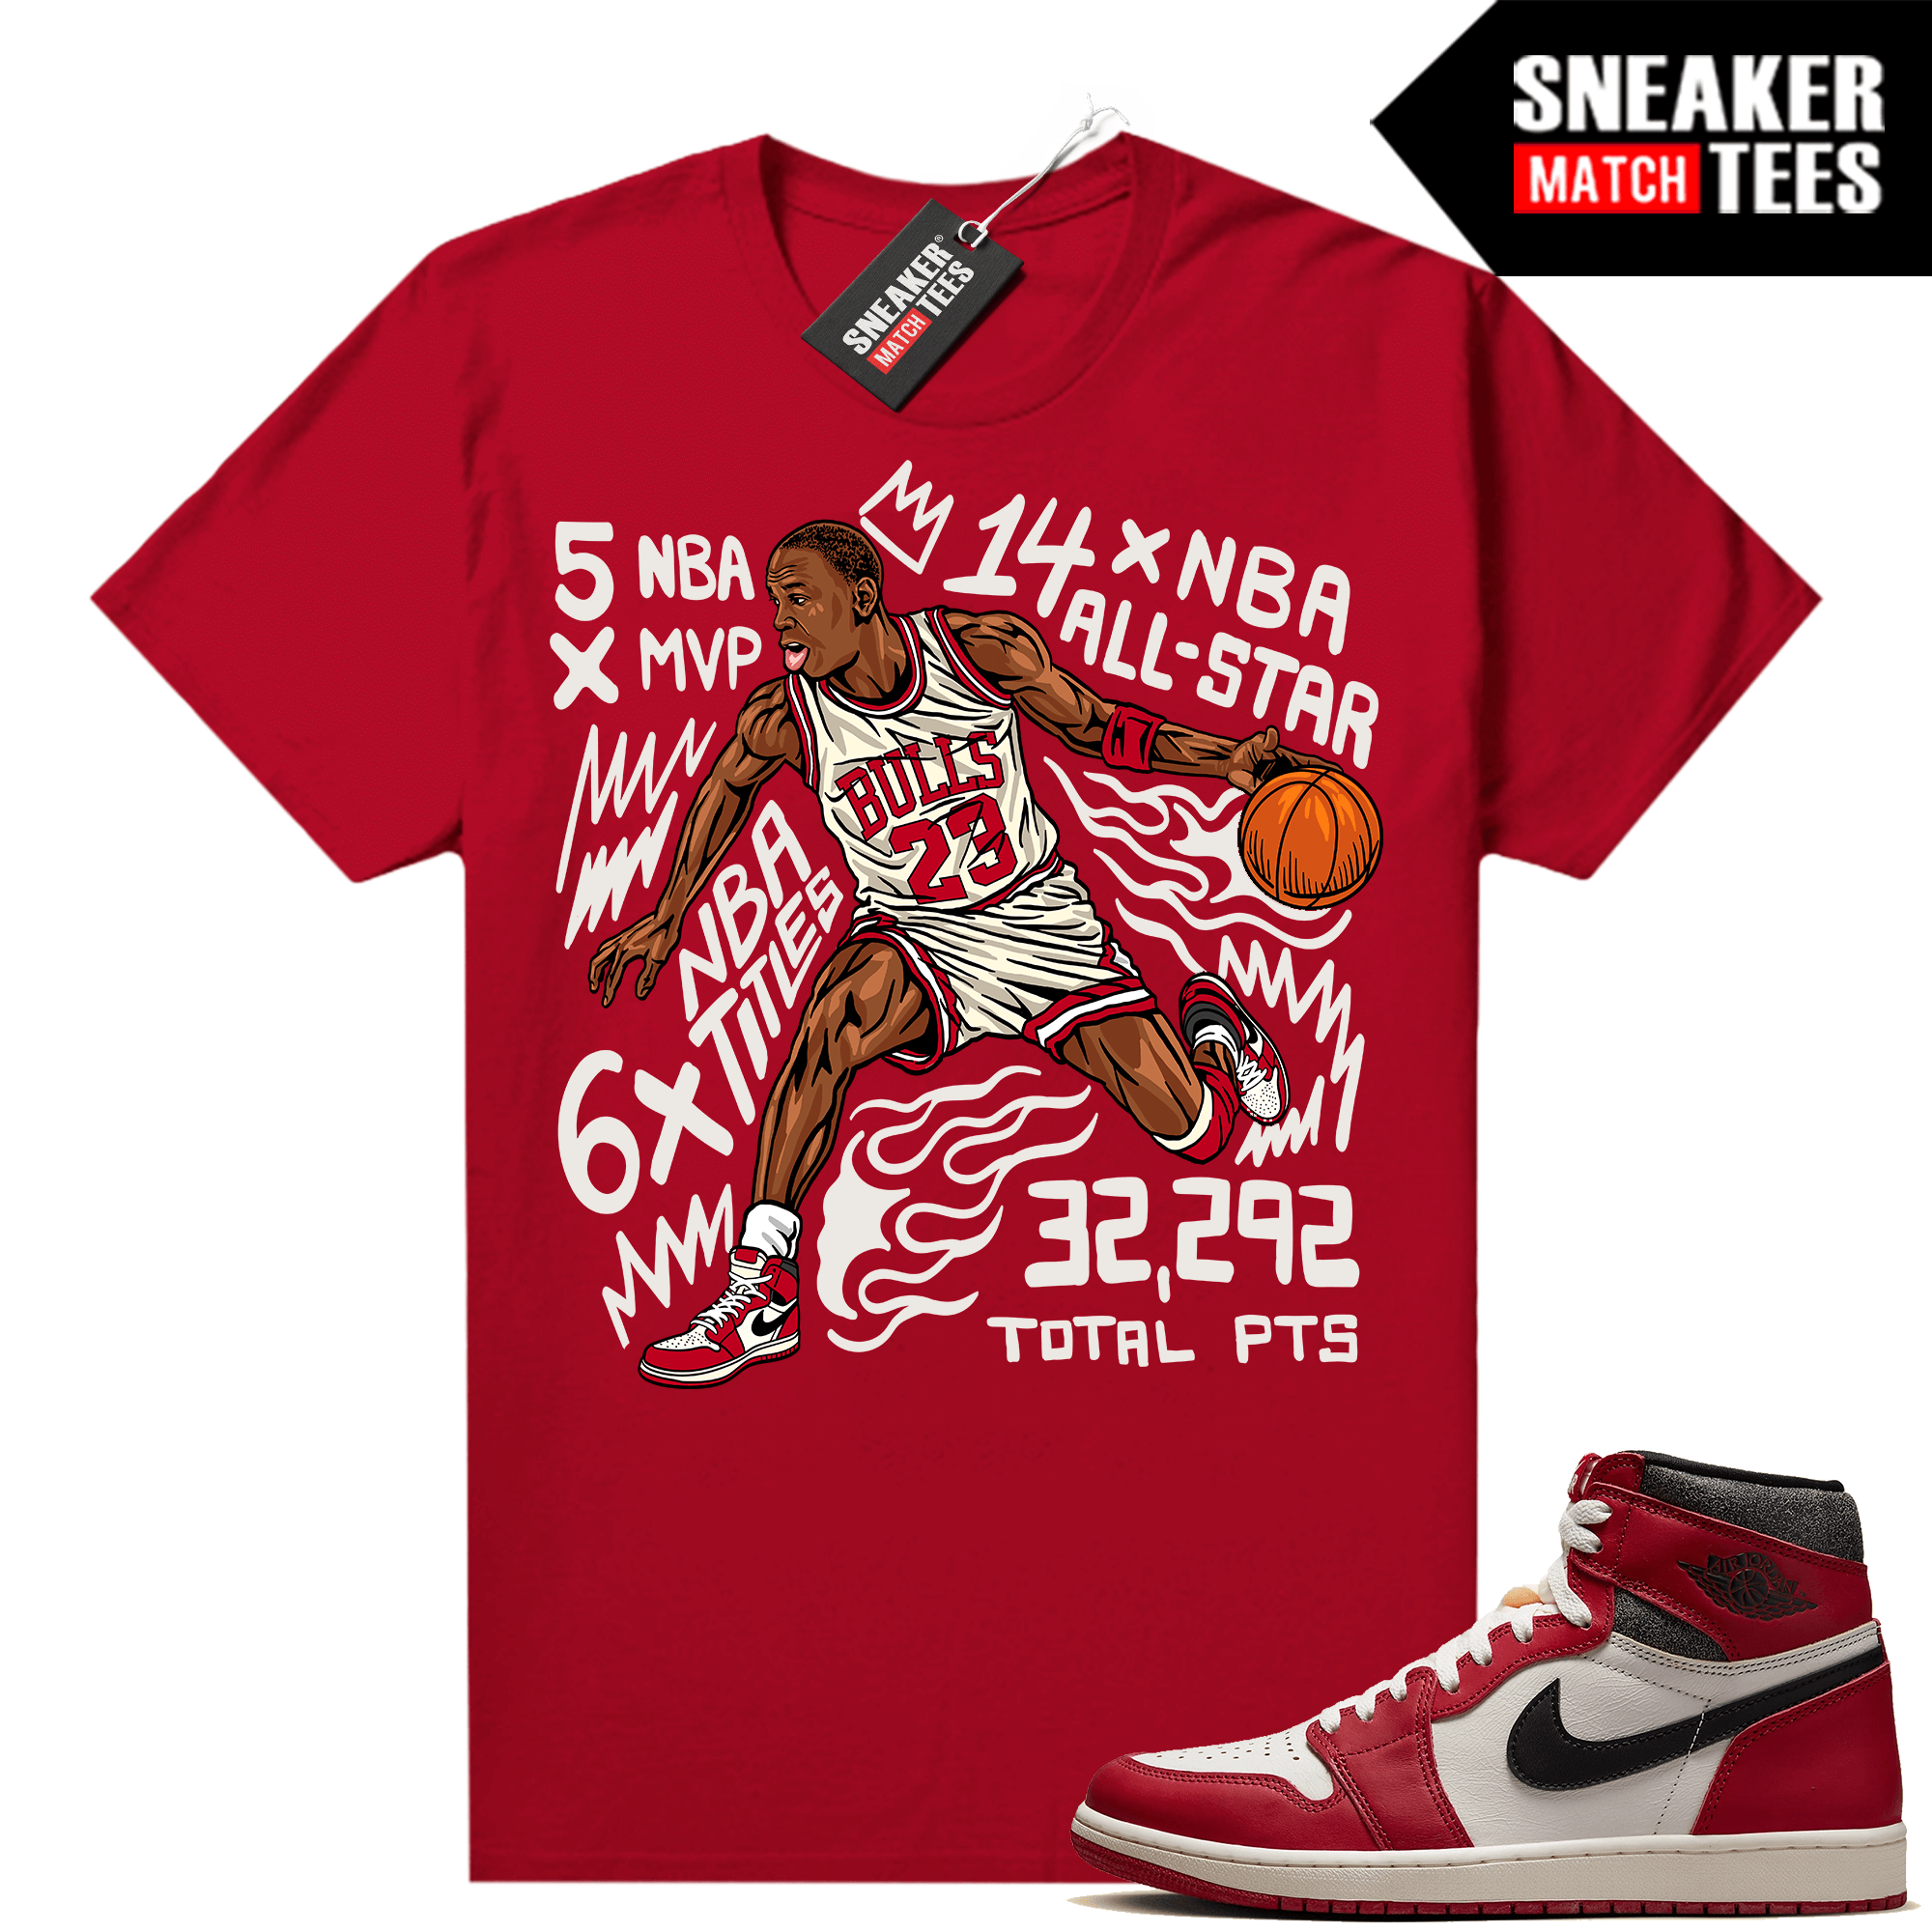 Chicago 1s Lost and Found Urlfreeze Sneaker Match Shirt Red MJ Fast Break